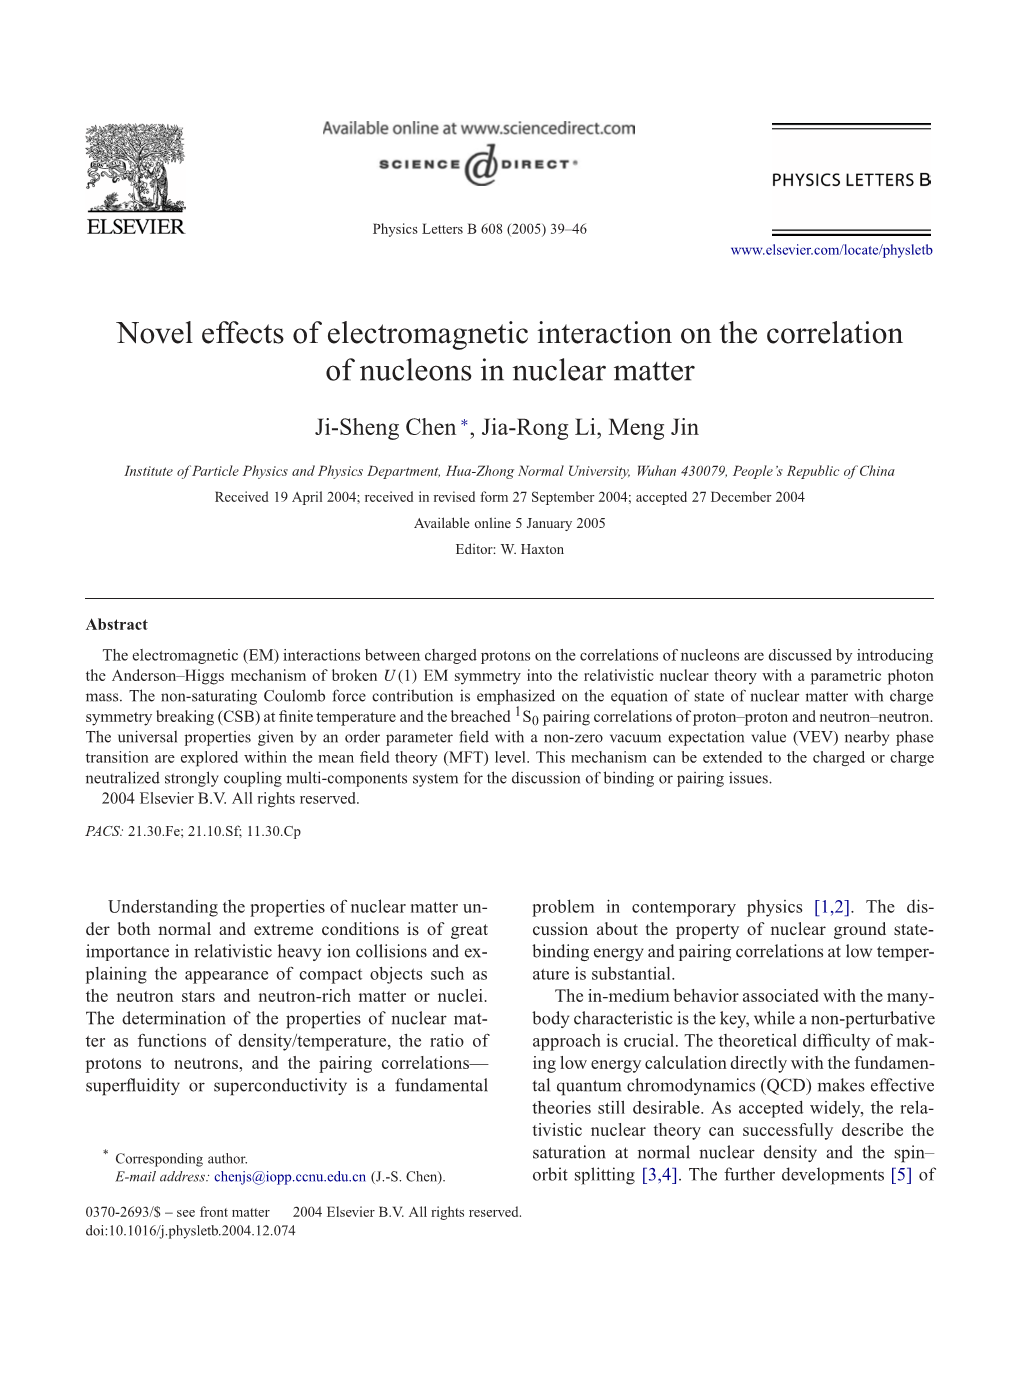 Novel Effects of Electromagnetic Interaction on the Correlation of Nucleons in Nuclear Matter